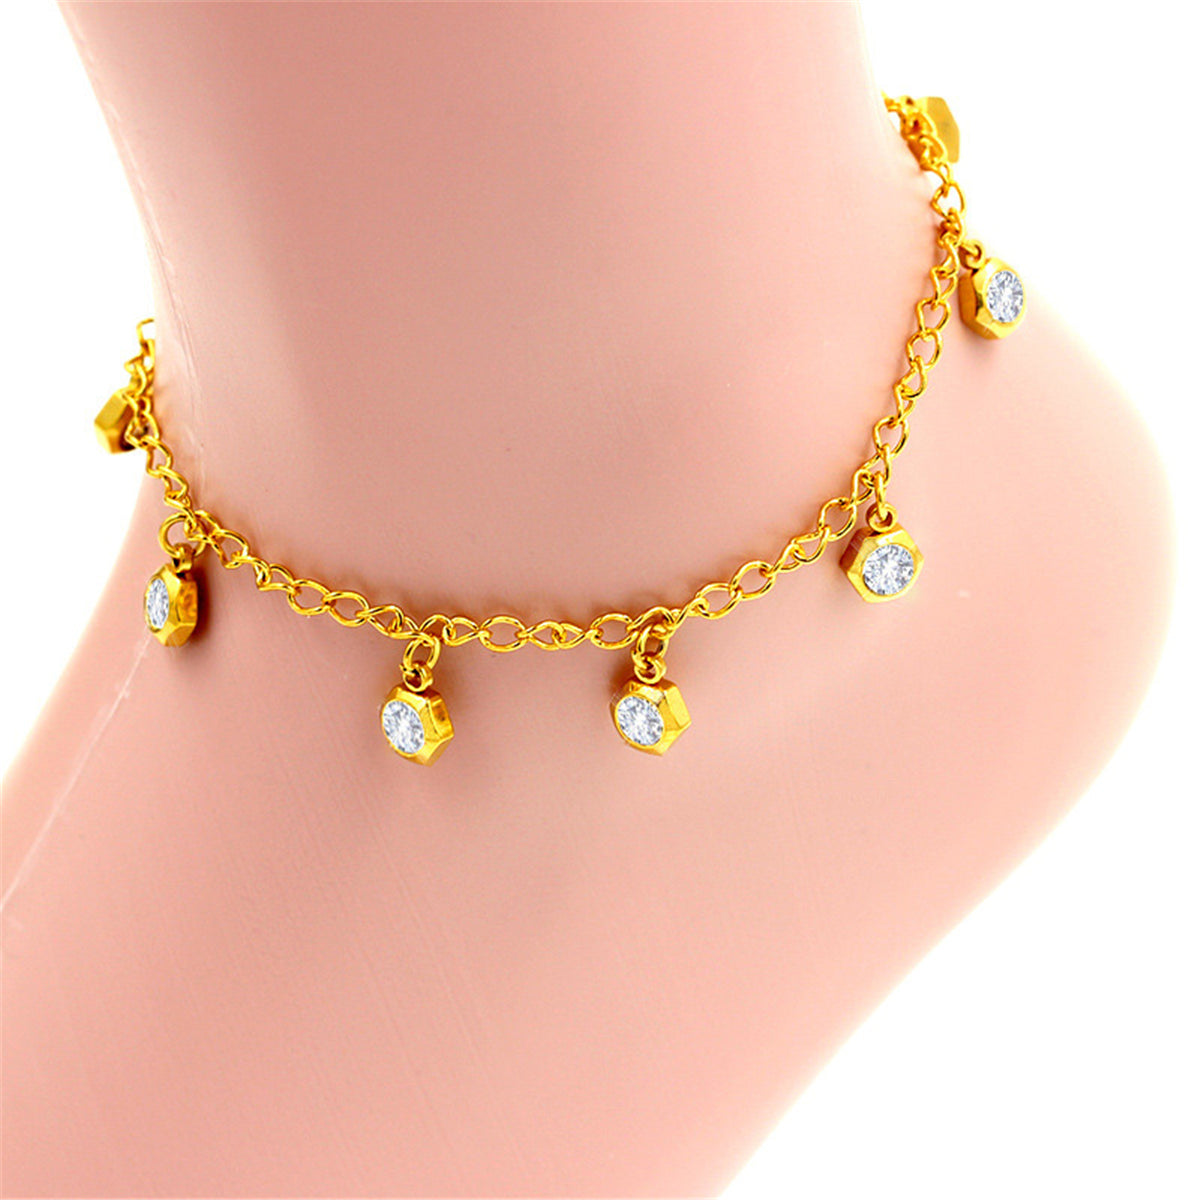 Cubic Zirconia & 18K Gold-Plated Hexagon Charm Anklet